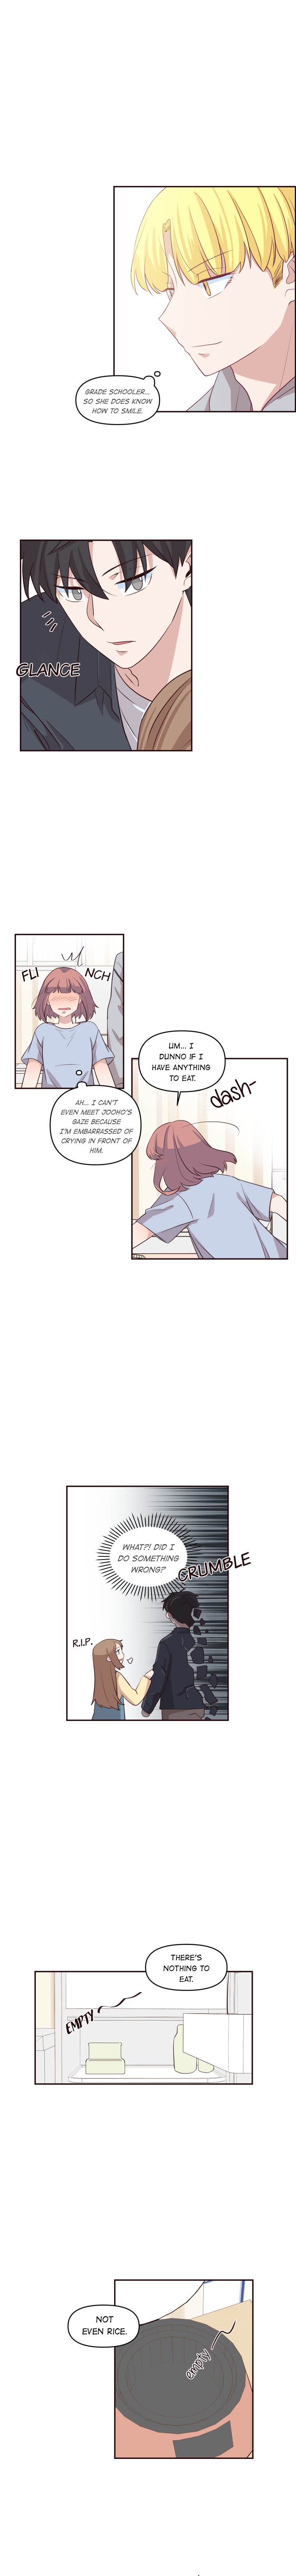 The Housewife Vol. 1 Ch. 29